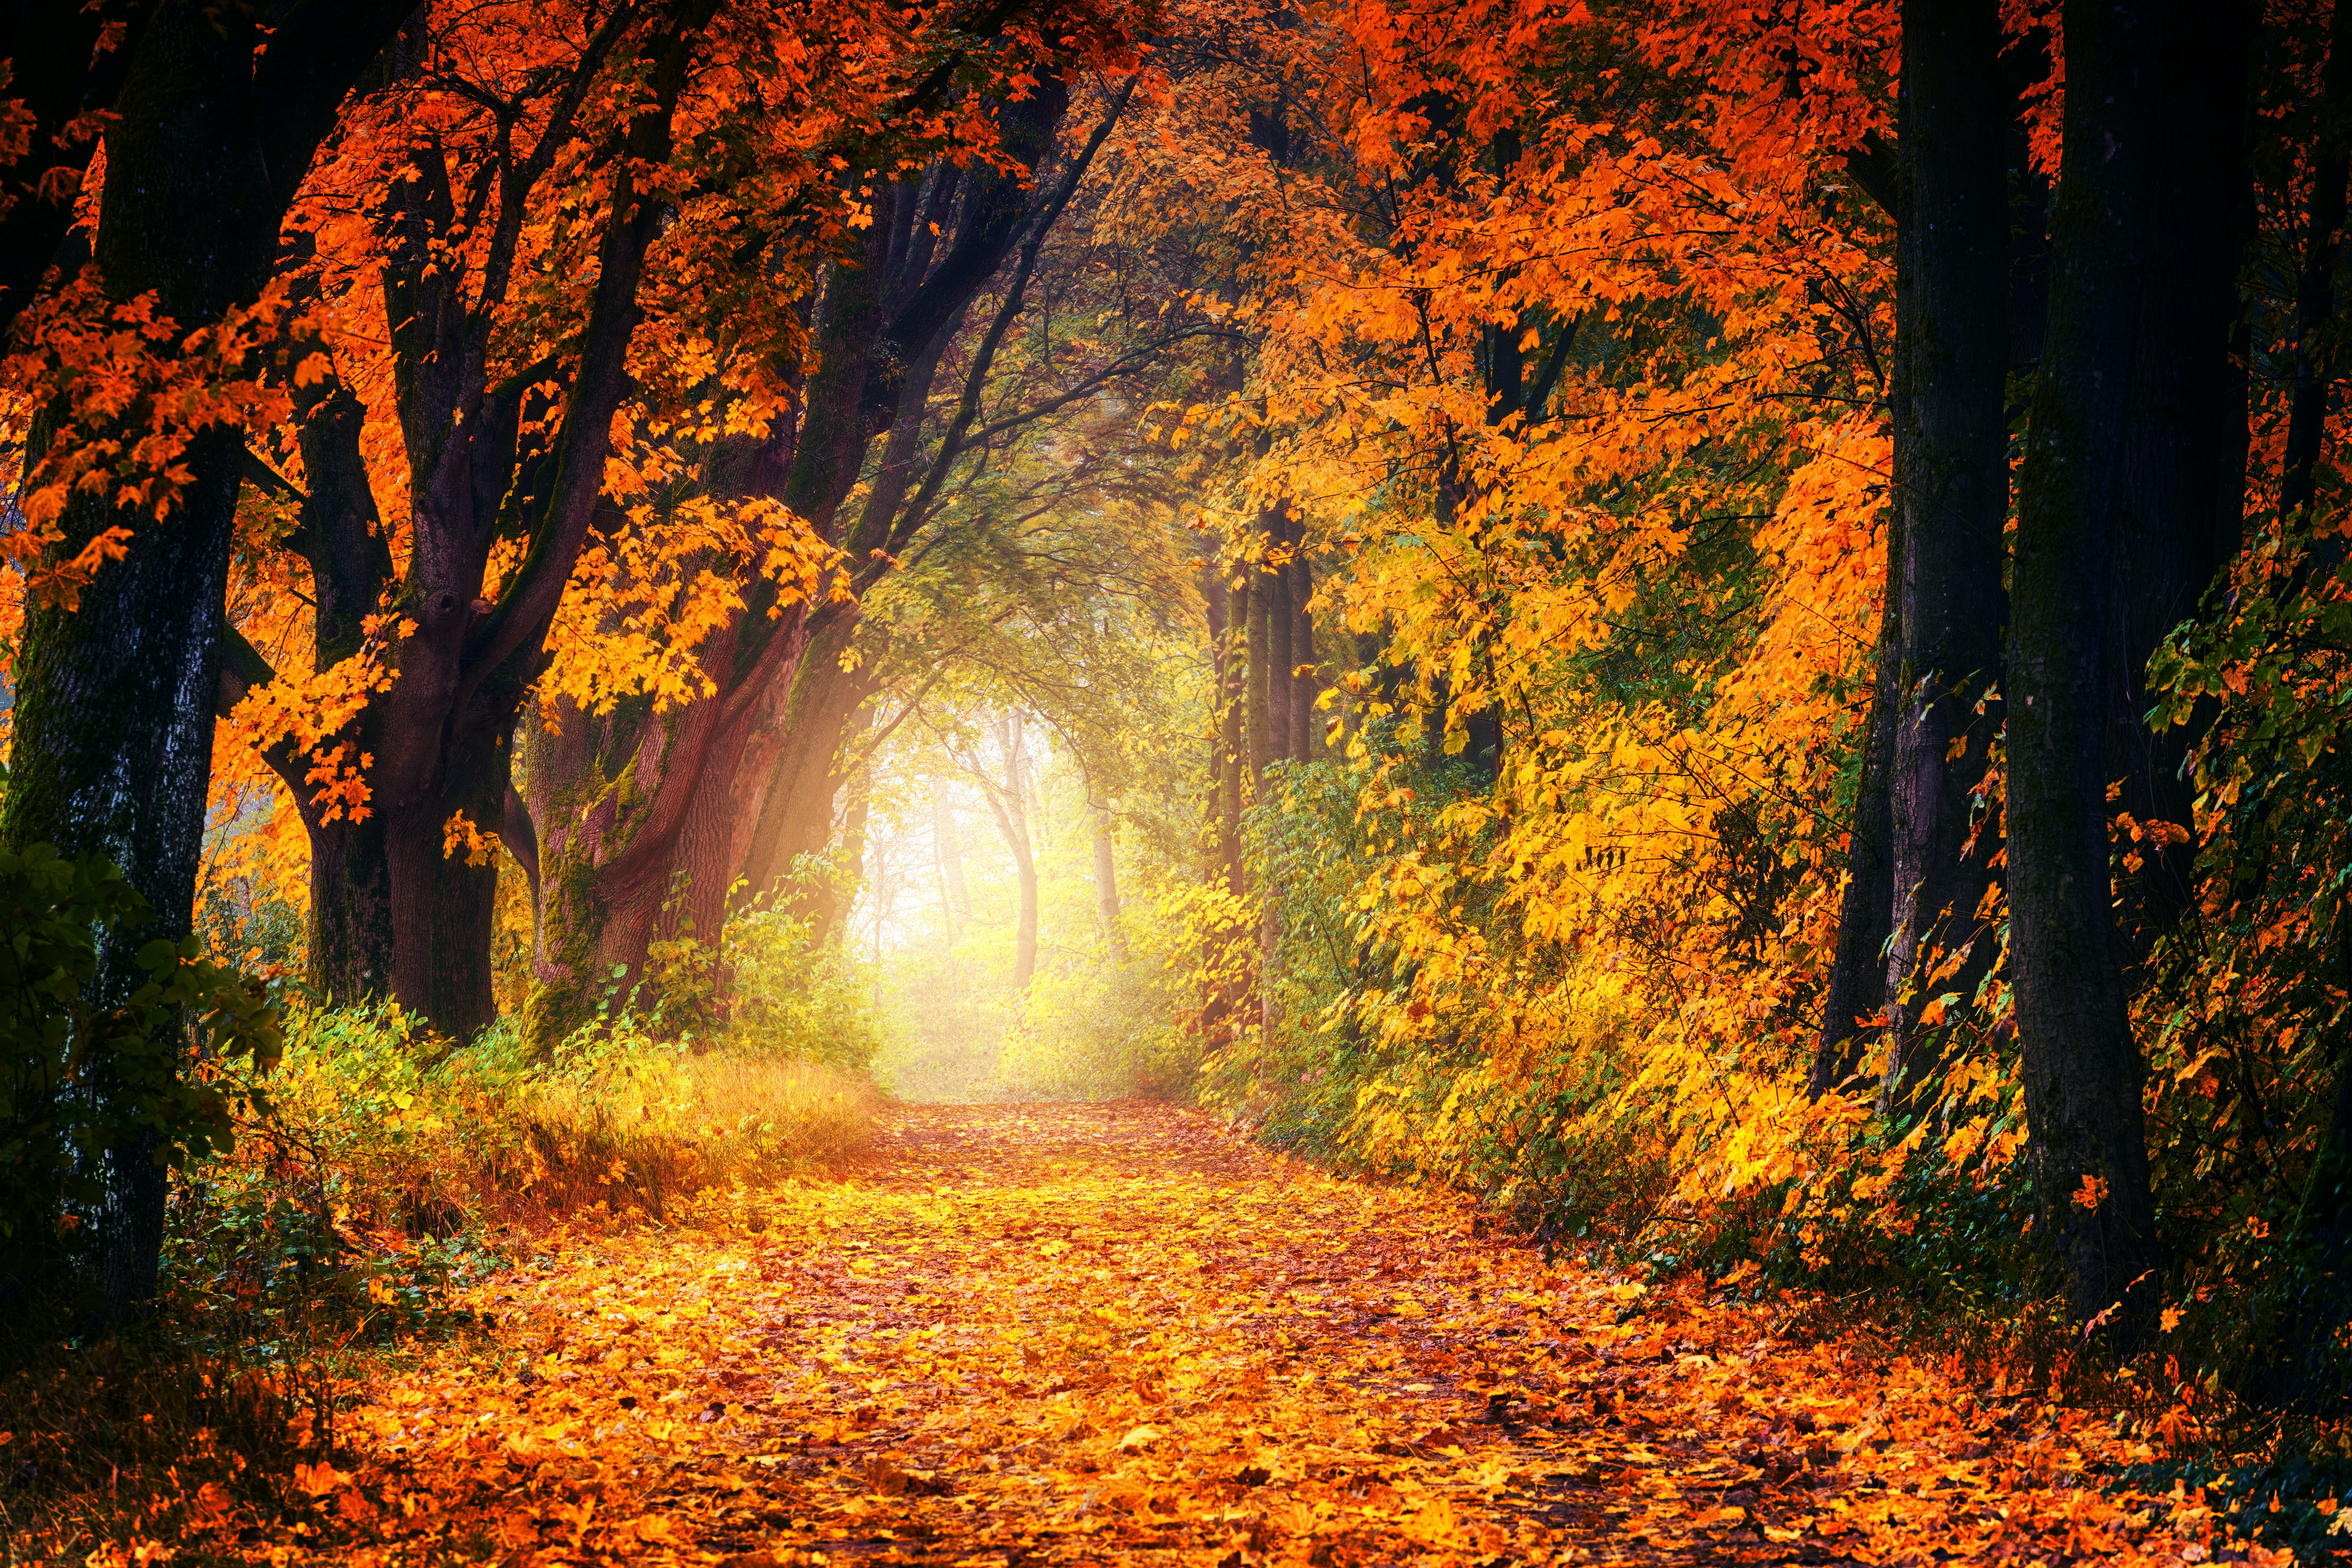 Fall background photos download the best free fall background stock photos hd images